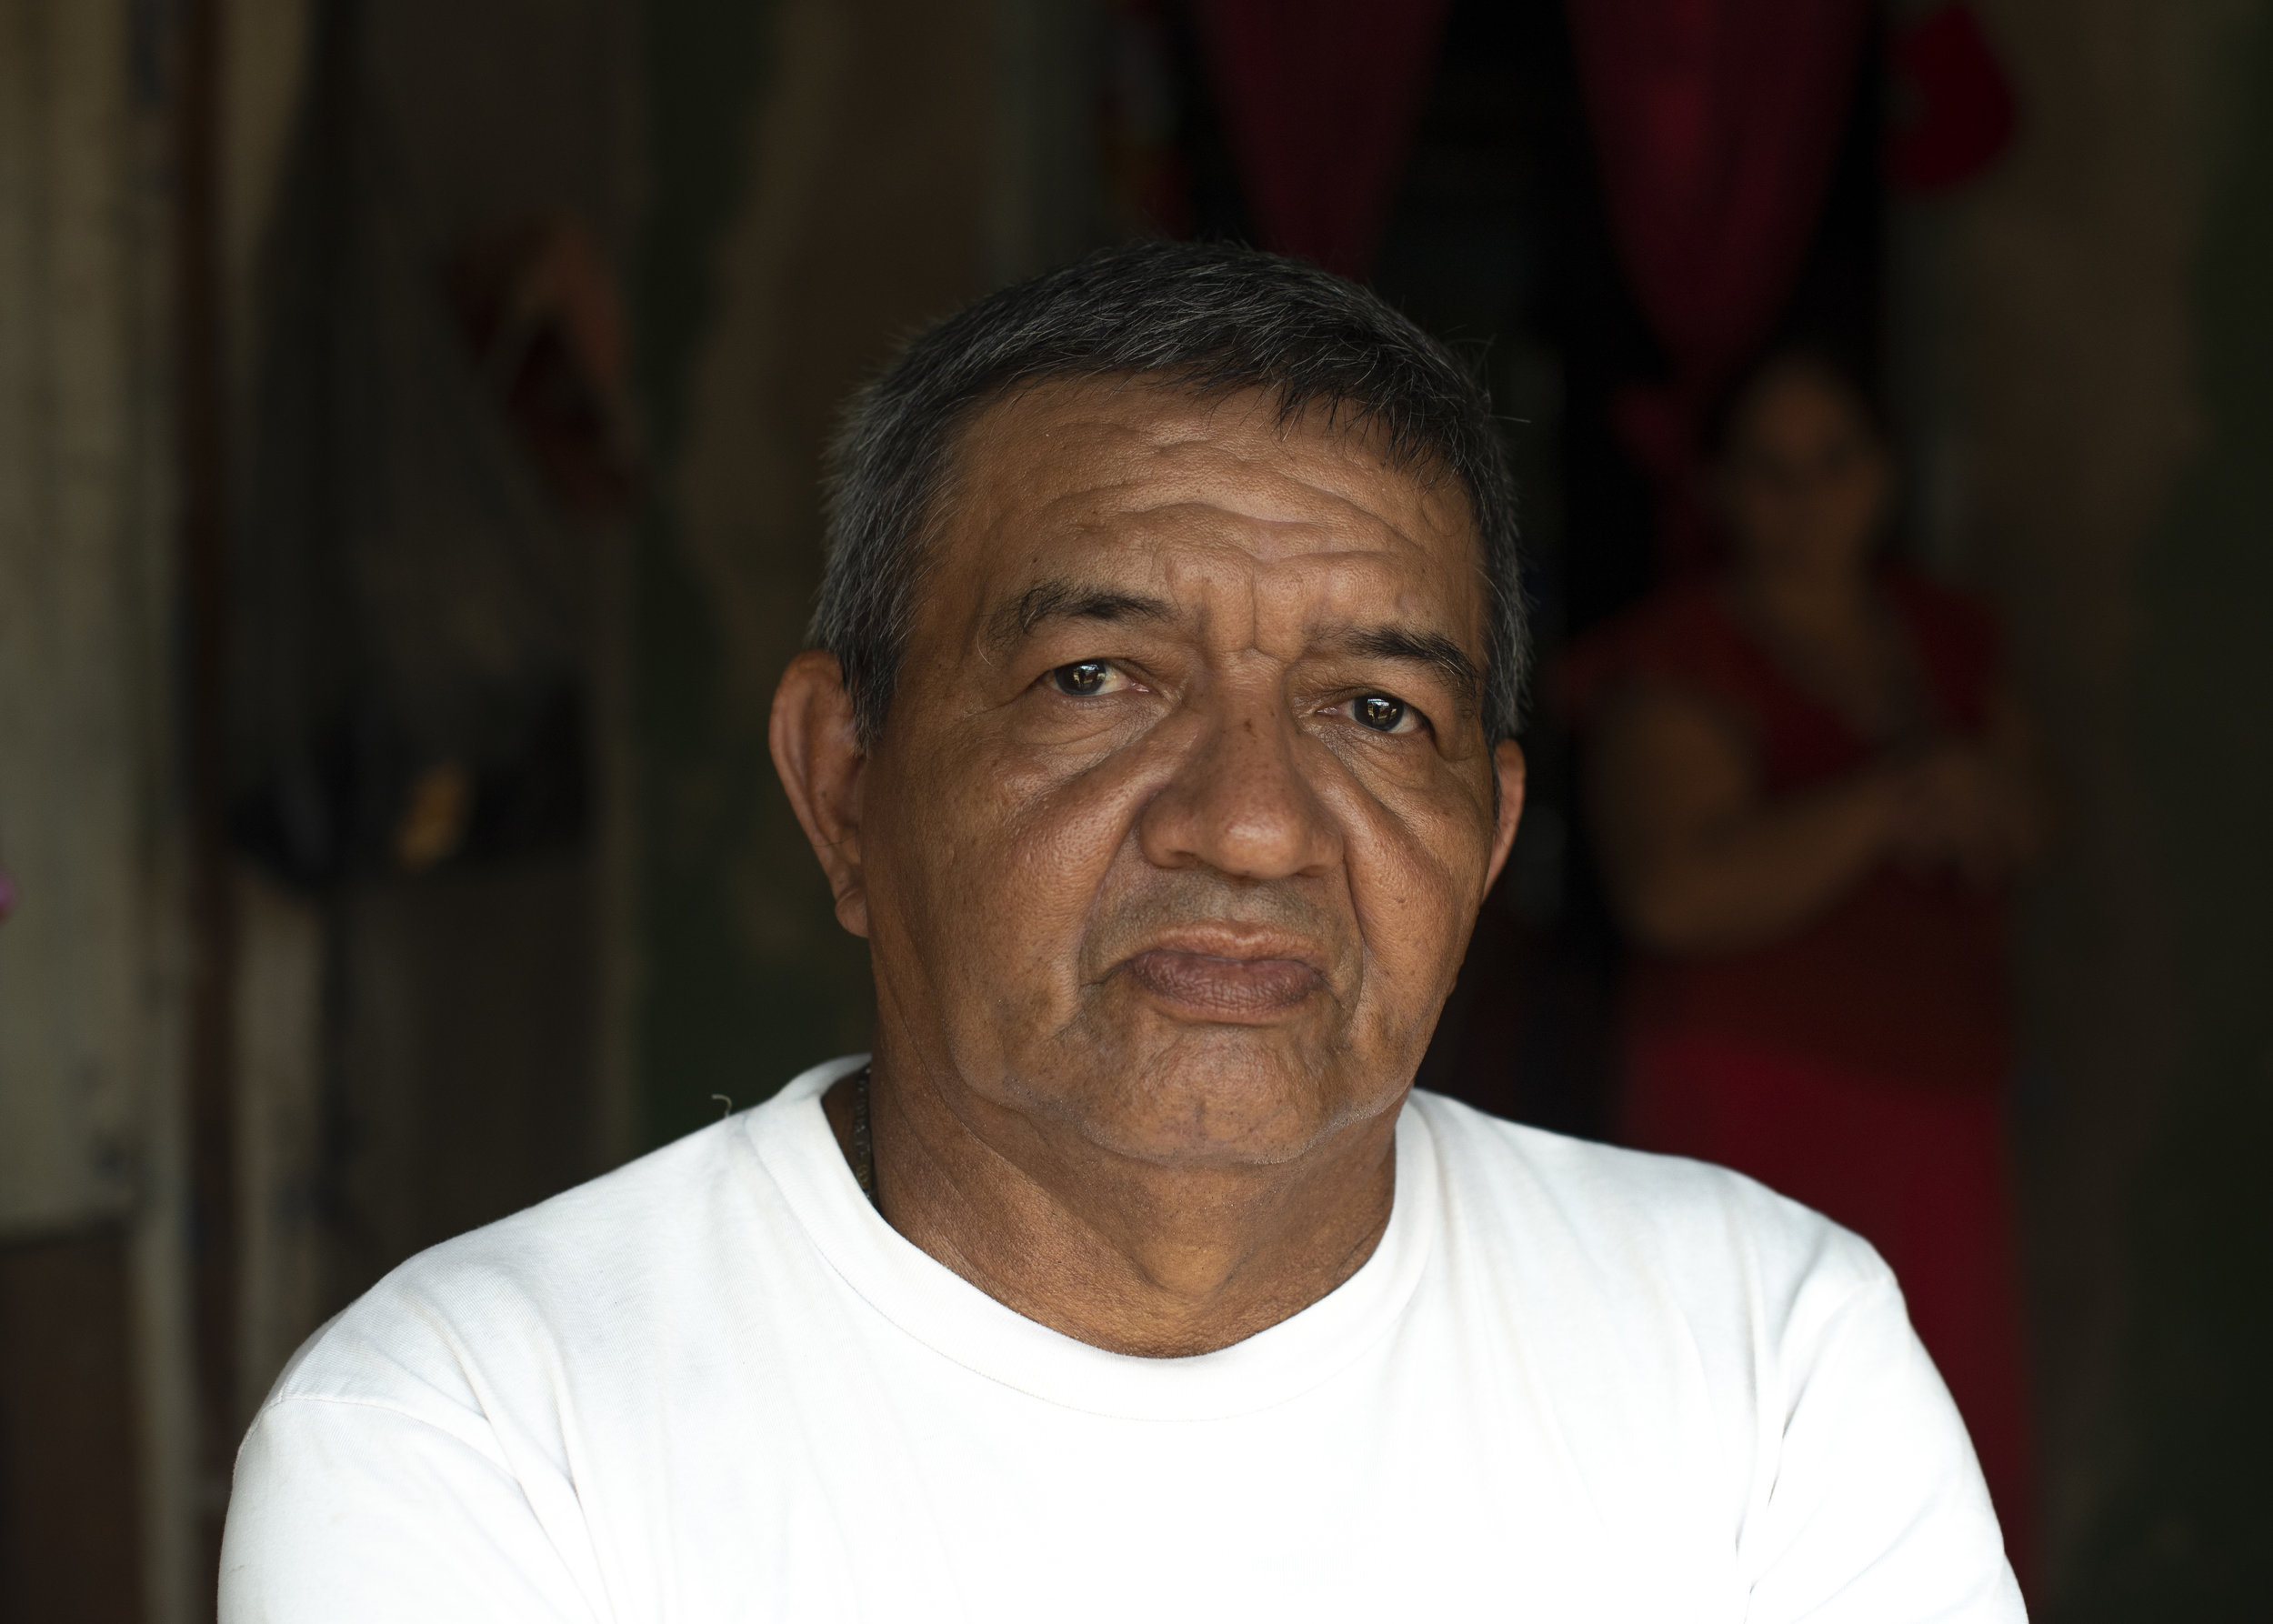  Sergio Montaban is a former taxi driver in El Progreso, Honduras. Some days he was only bringing home $1.63 USD after gang extortion rates and car rental, but when a second gang also began demanding payment and he couldn't pay, his son was killed as